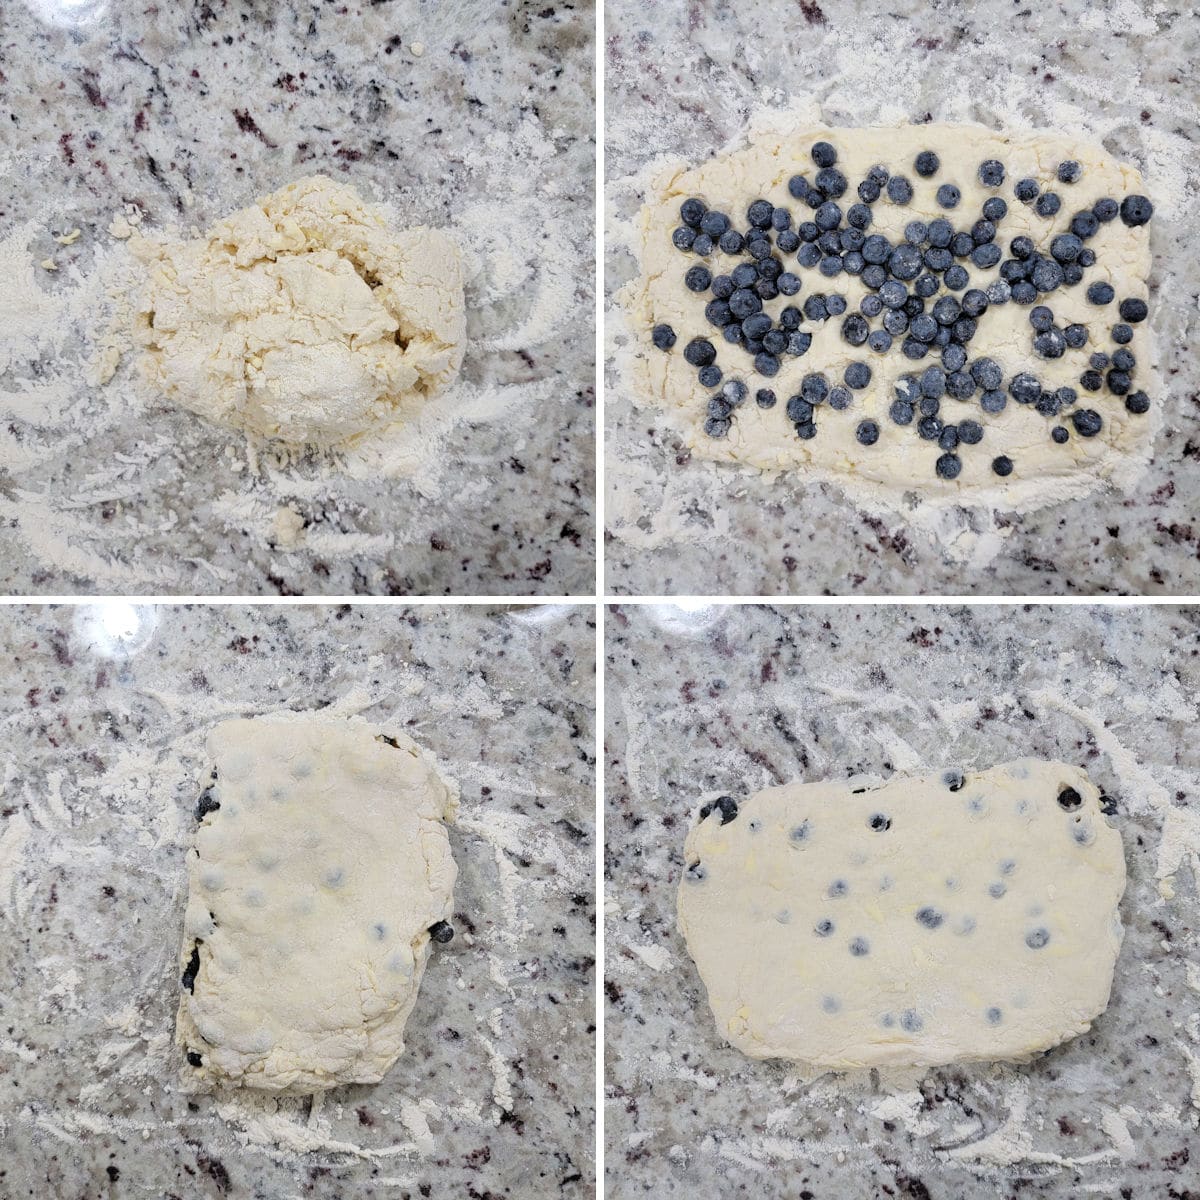 Folding blueberry biscuit dough to create layers.